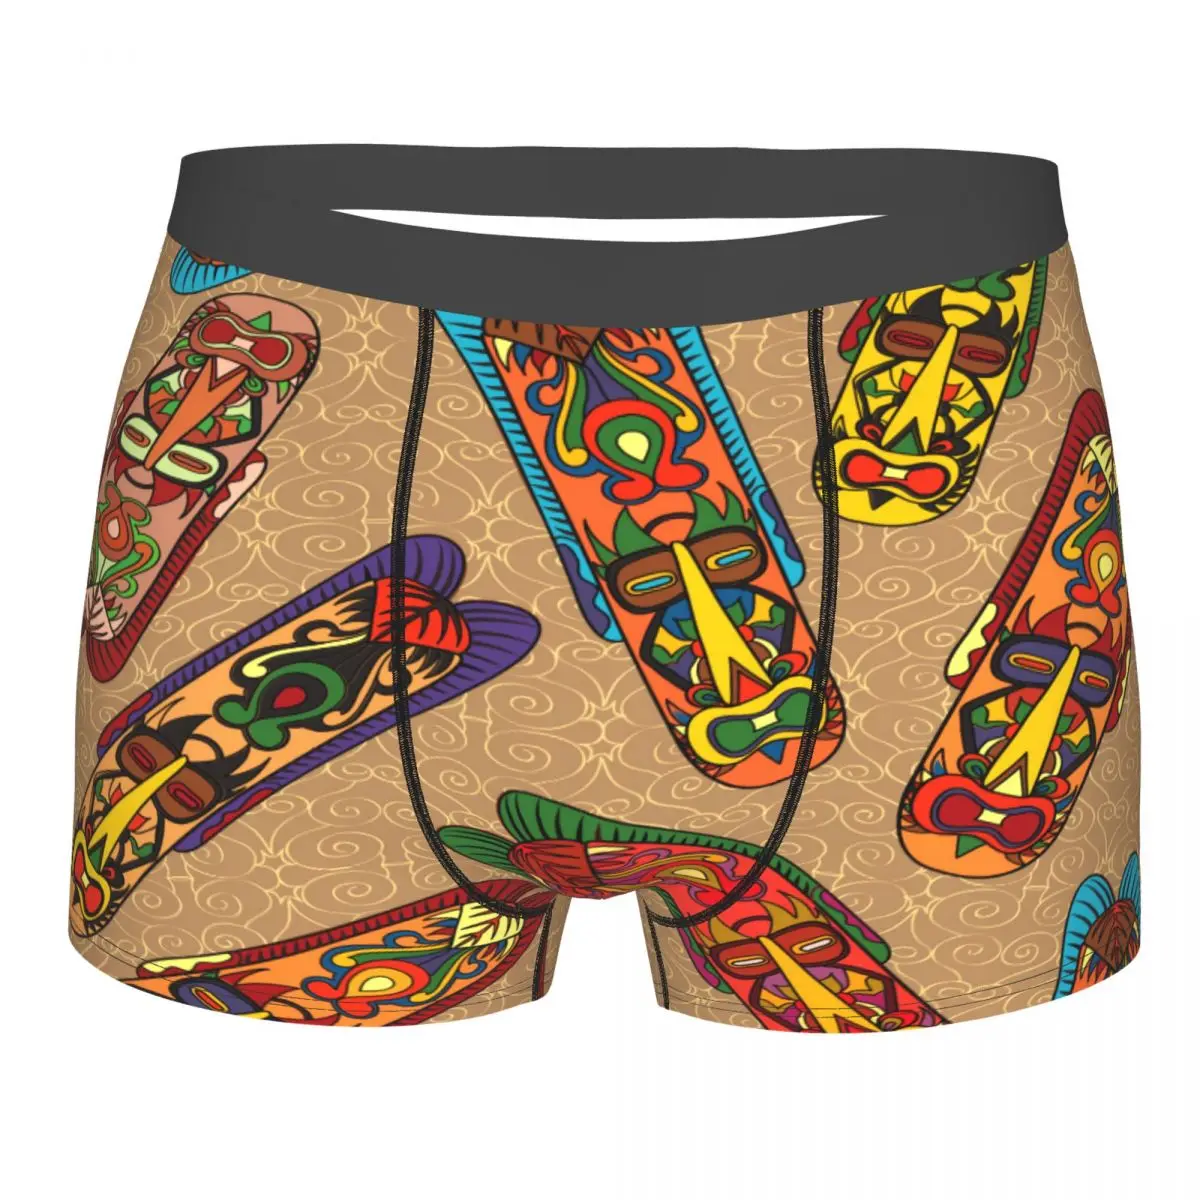 Men's Panties Underpants Boxers Underwear Tribal African Mask Ethnic Sexy Male Shorts